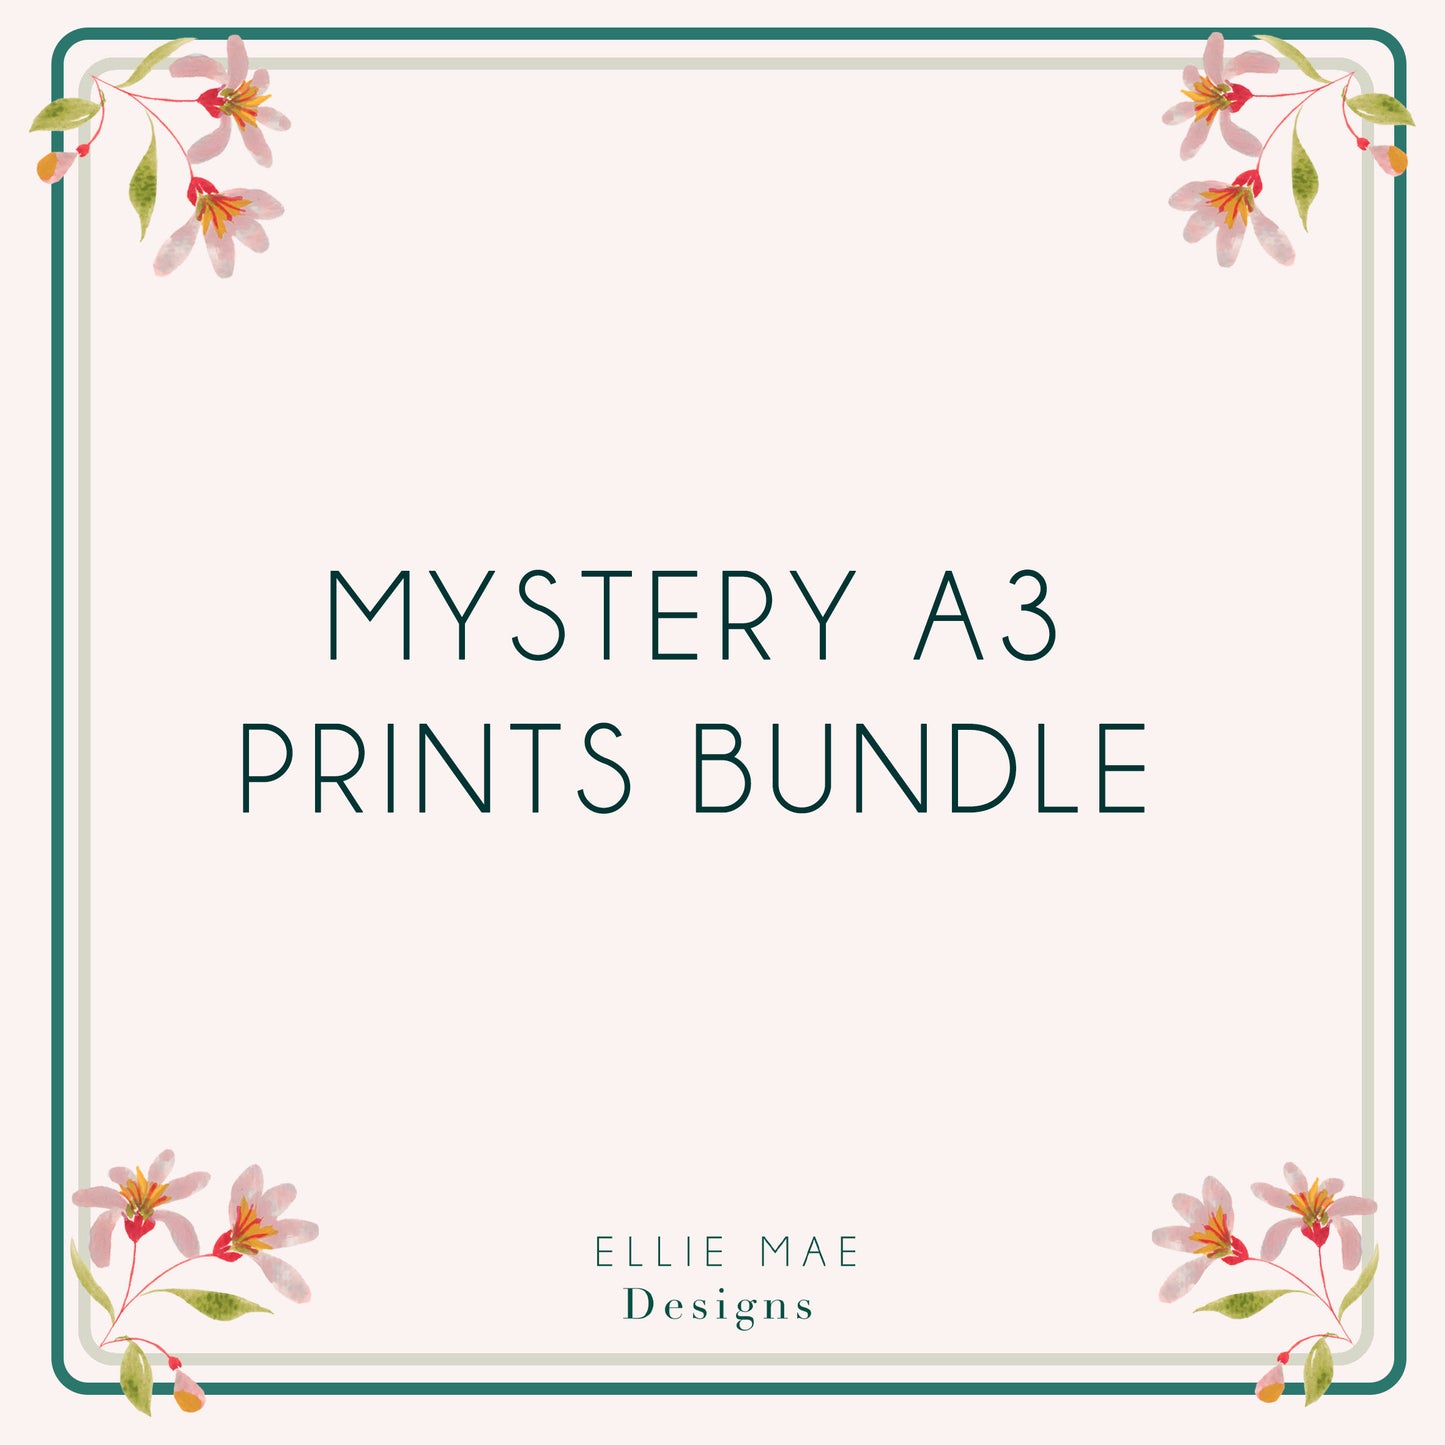 A3 mystery print bundle. Can't decide what prints to have, don't worry we will choose 3 cohesive prints at random for you! 